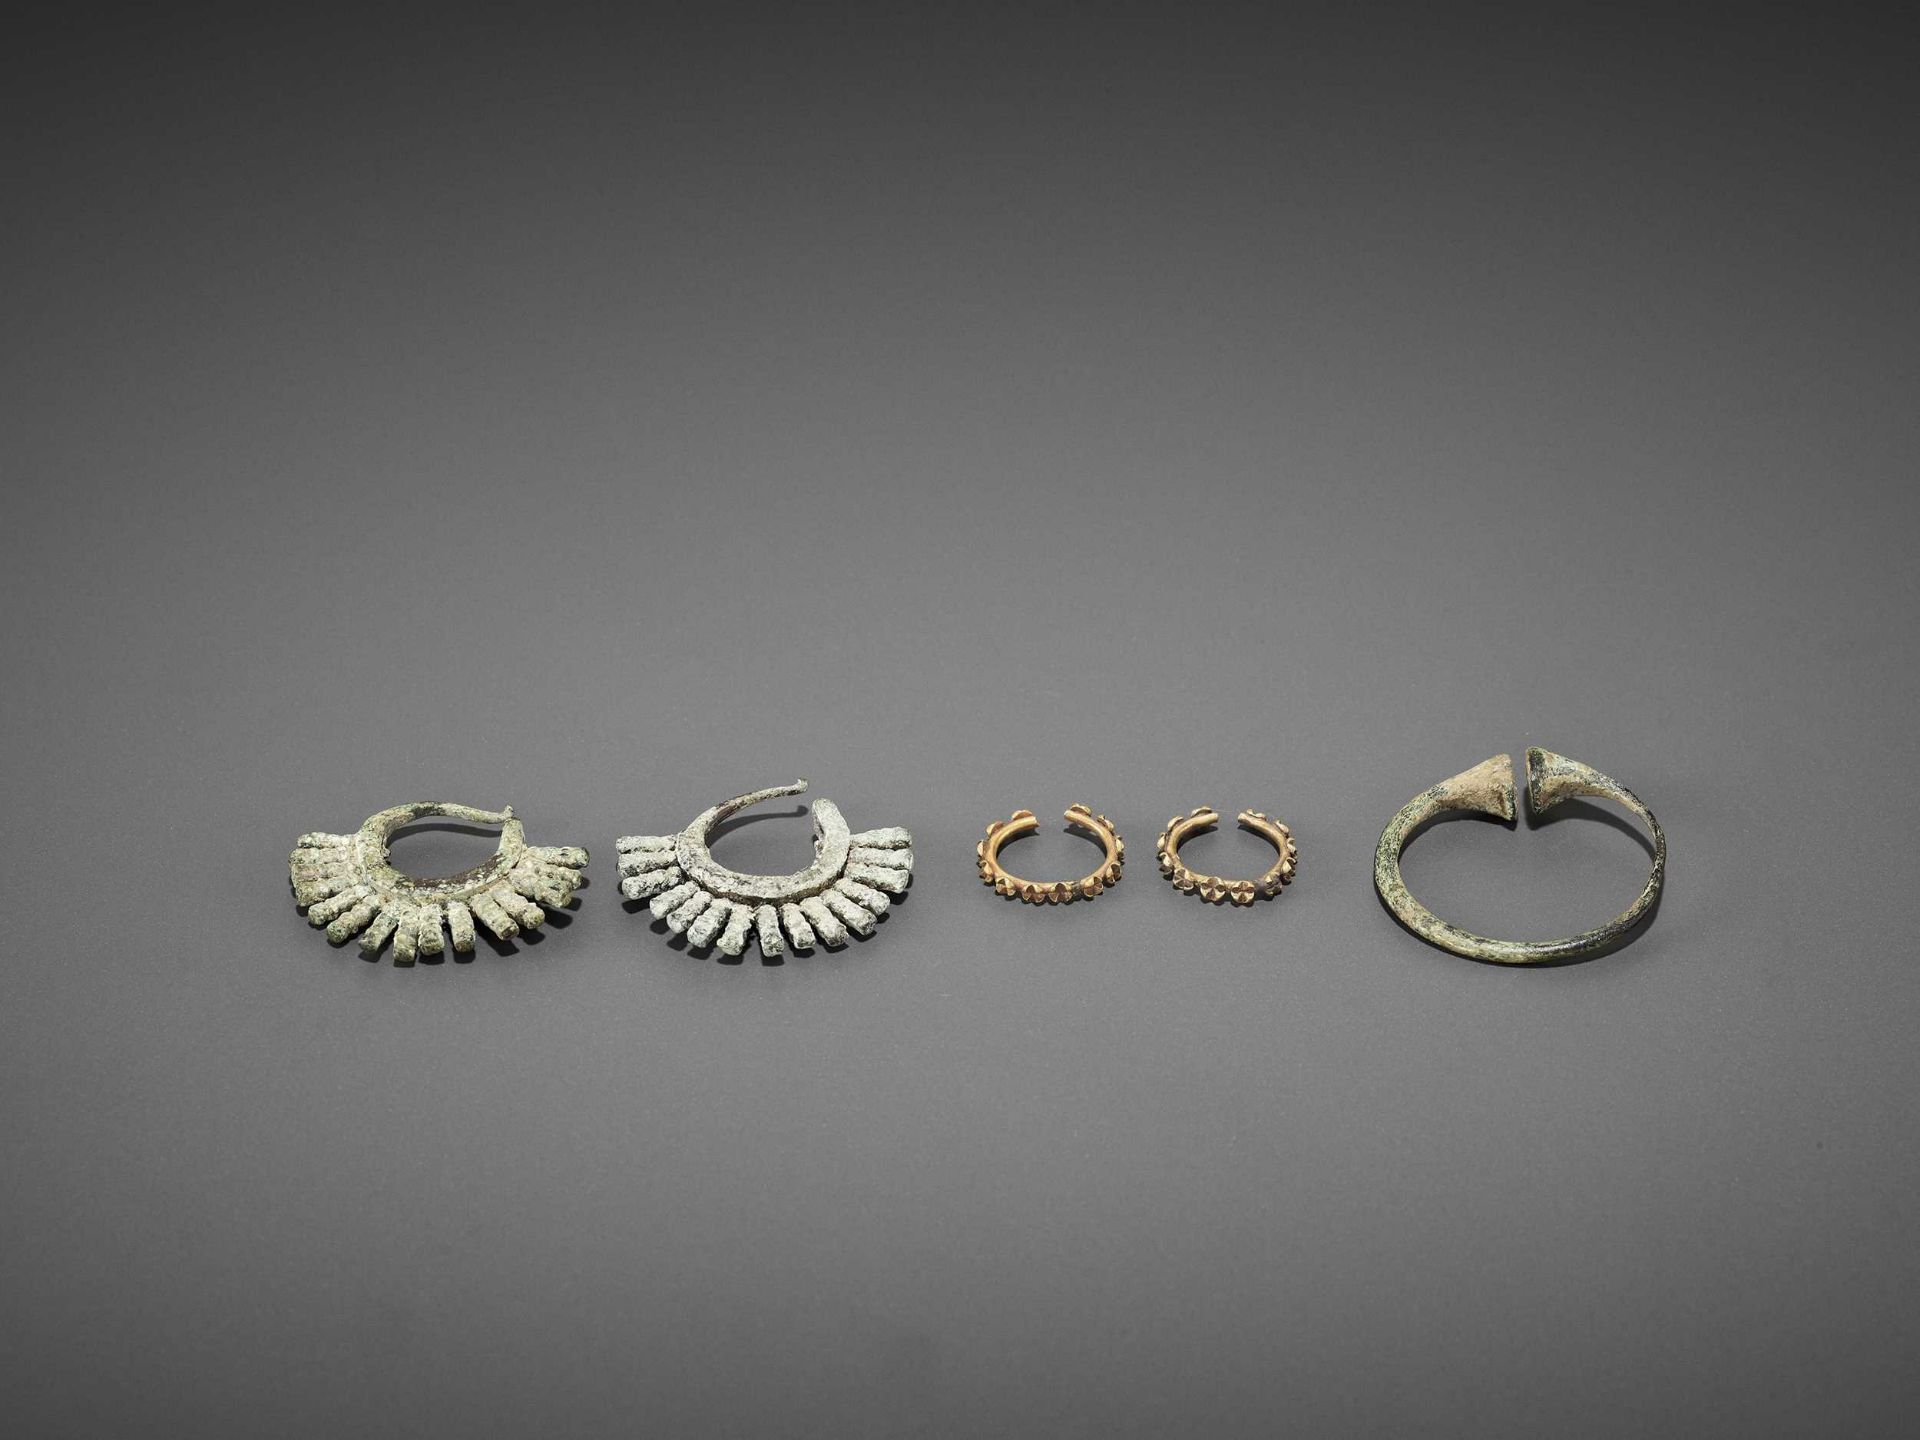 FIVE BACTRIAN GOLD AND BRONZE EARRINGS - Image 3 of 6